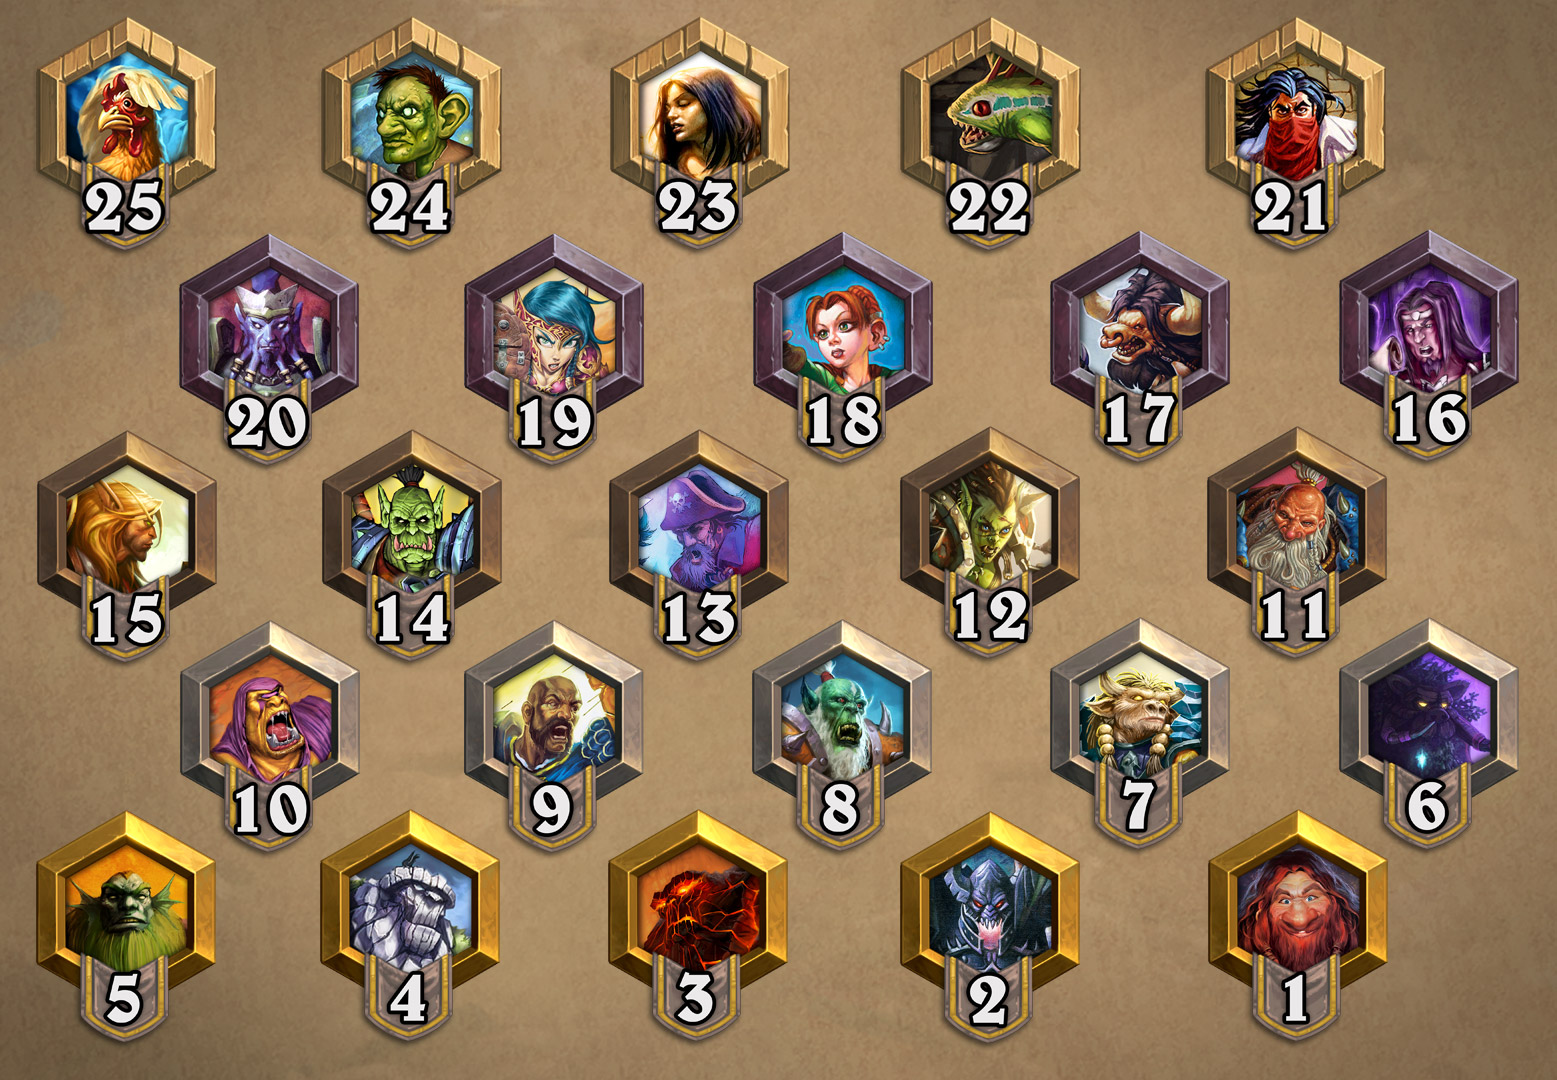 New Feature Added - Live Leaderboards! - Hearthstone Top Decks